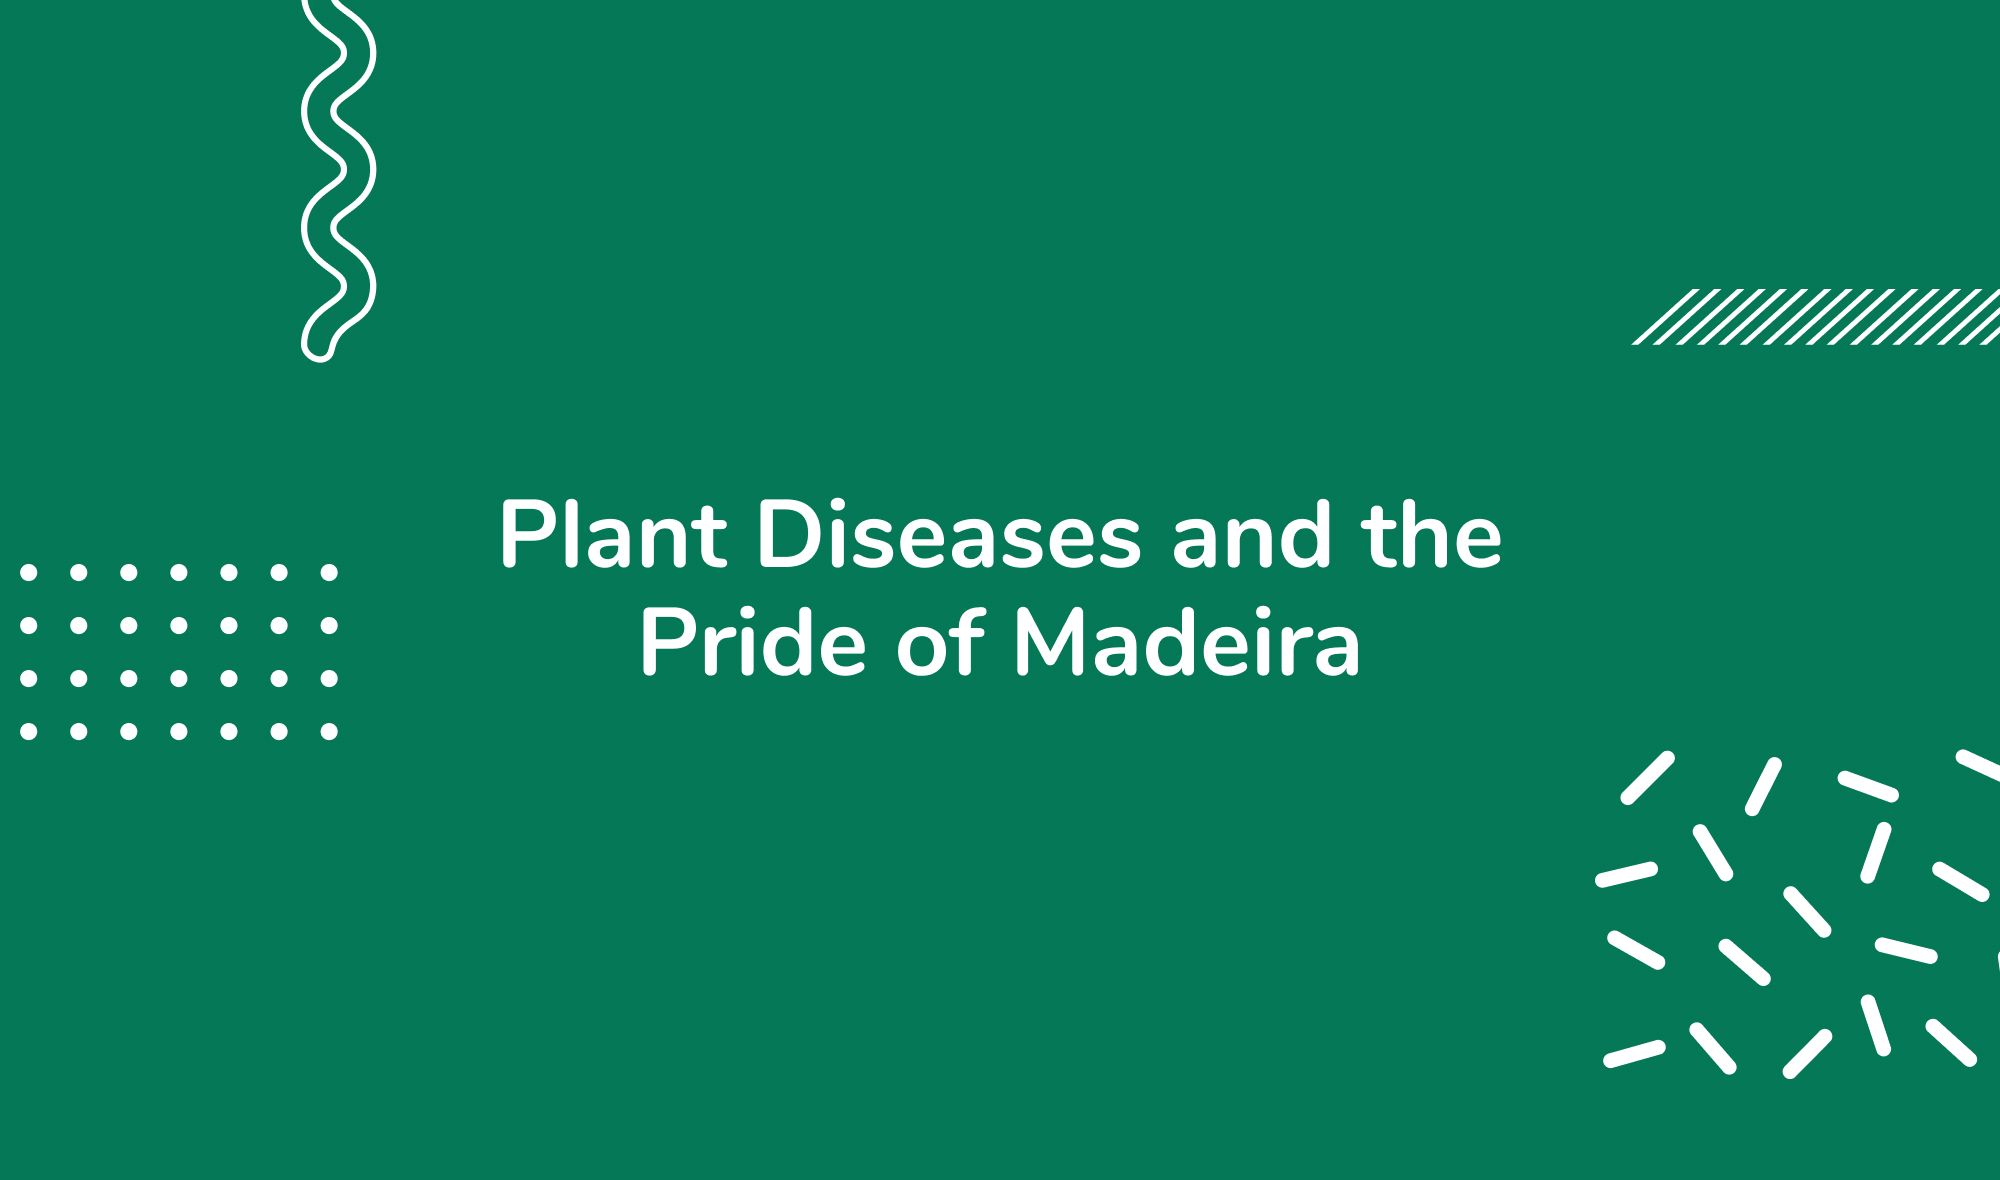 Plant Diseases and the Pride of Madeira